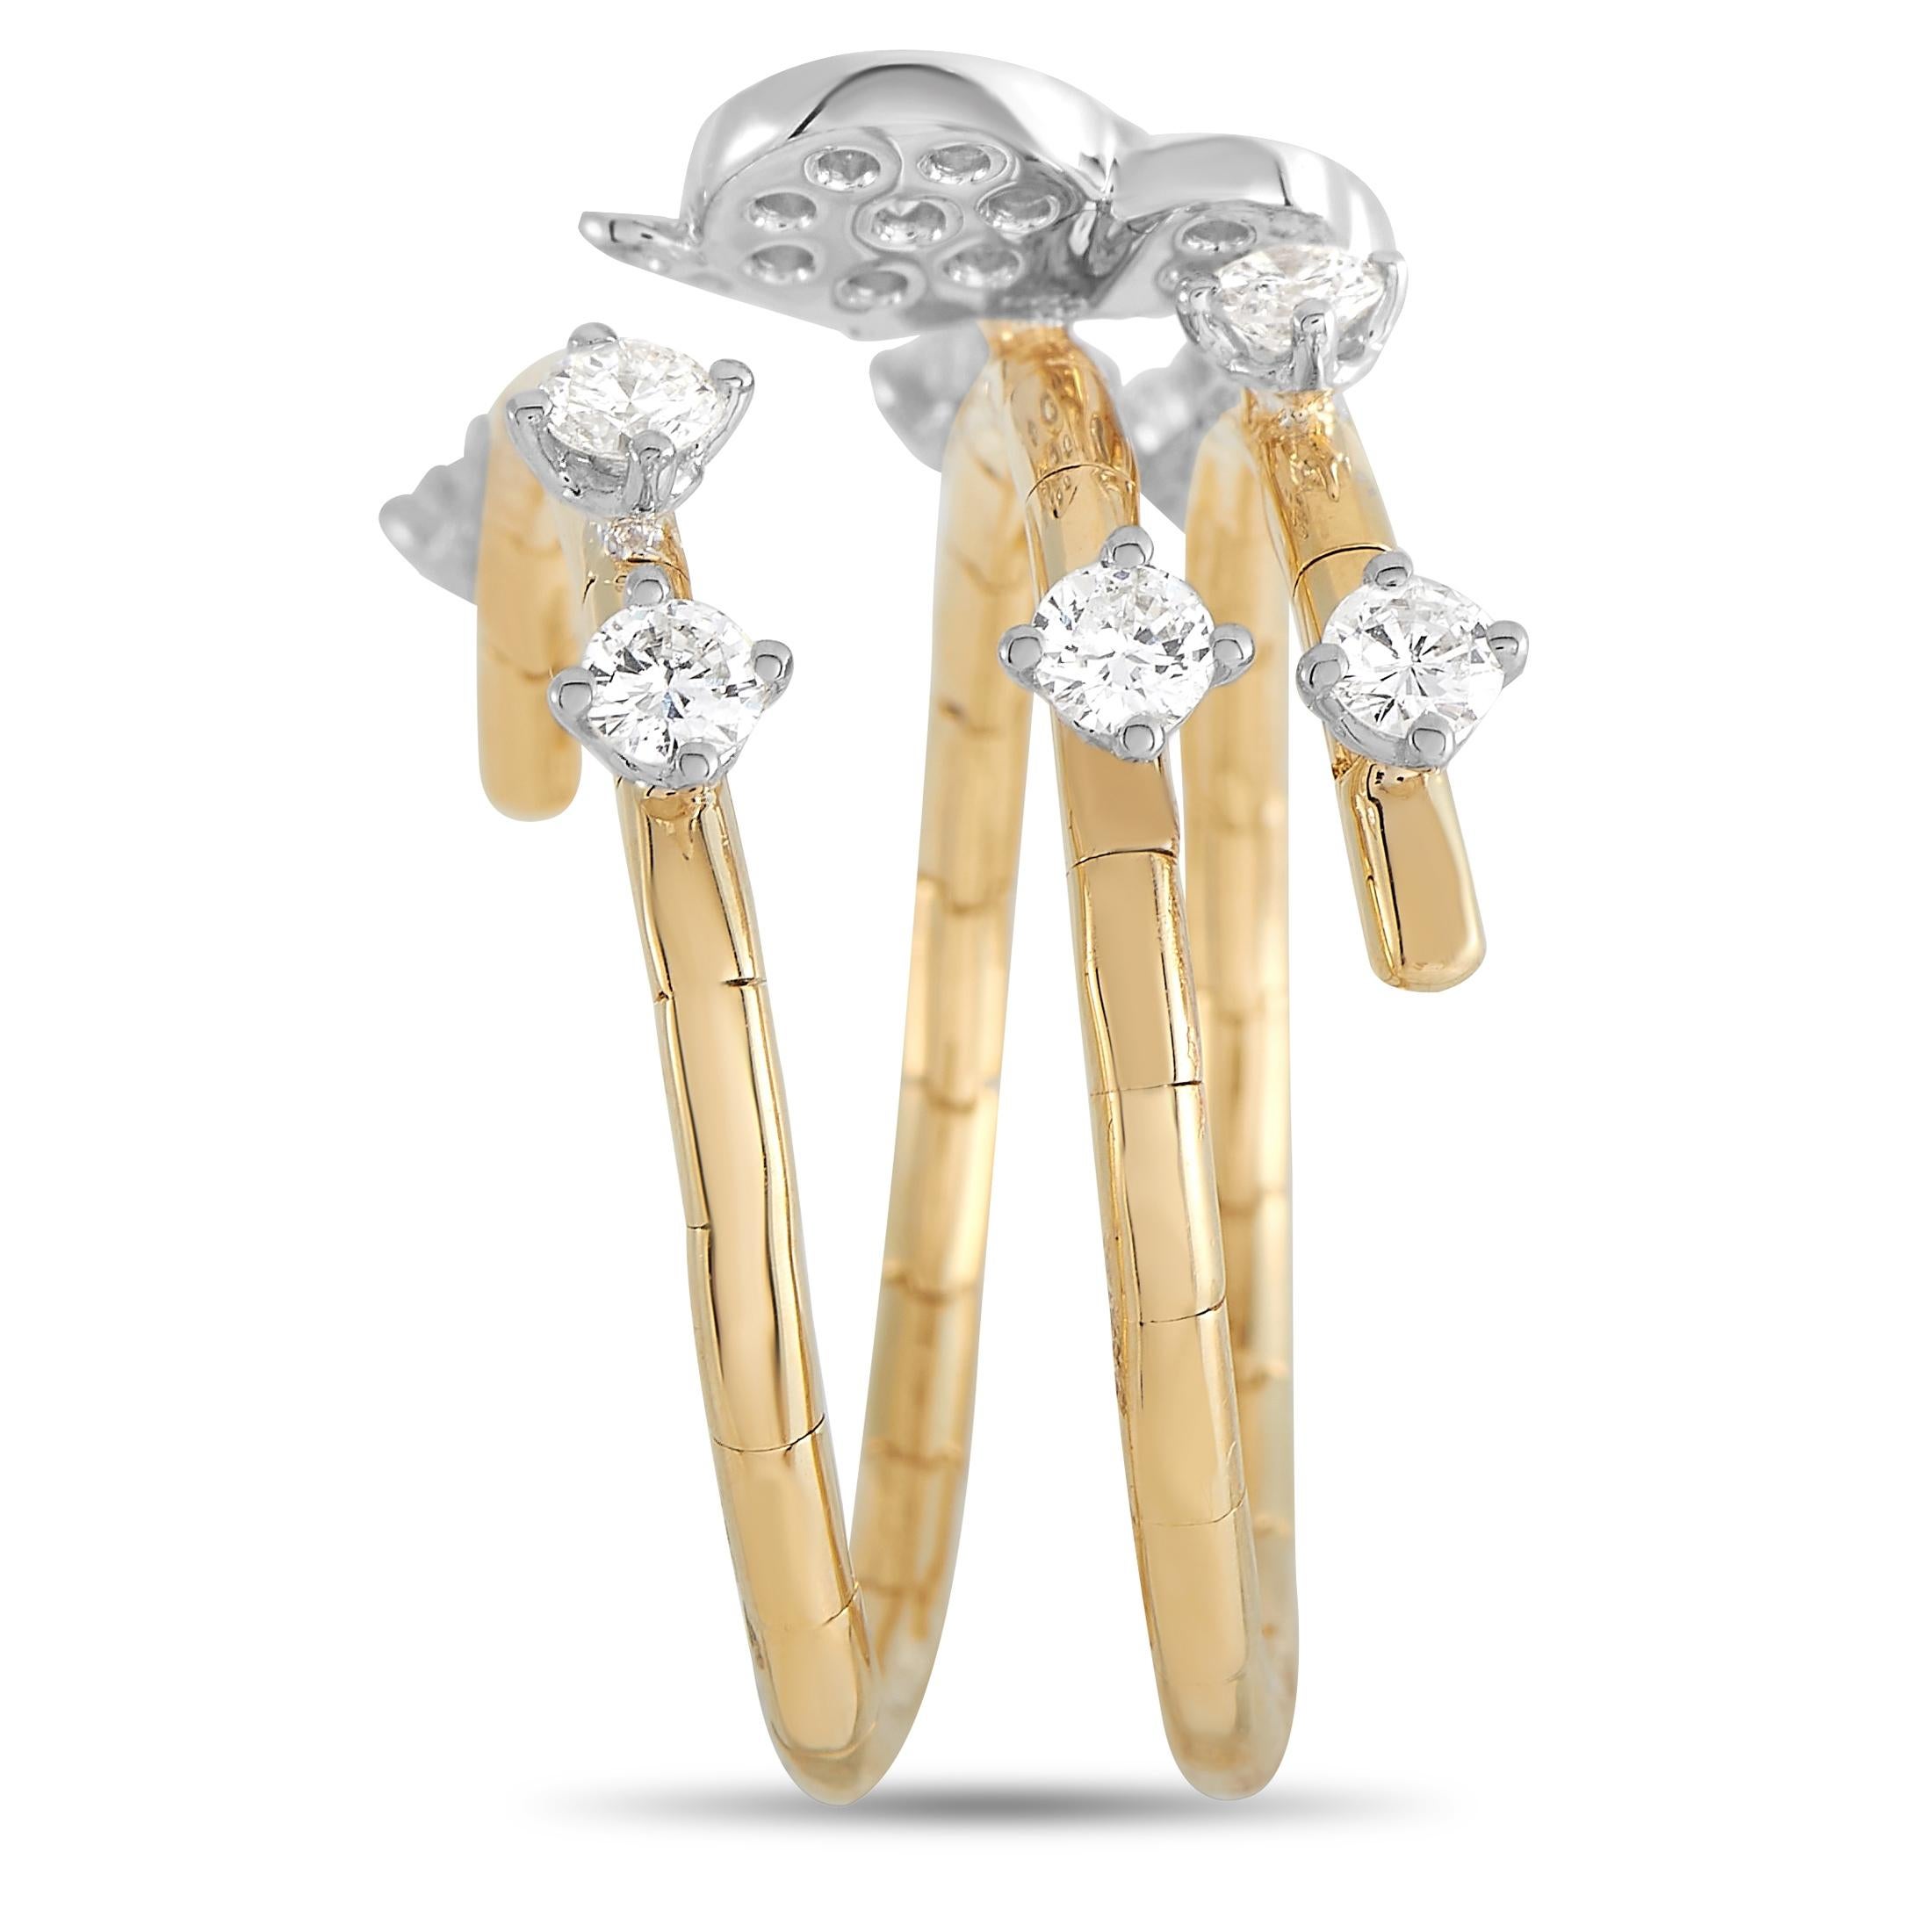 Contrasting metals and charming butterfly accents make this a ring that will continually capture your imagination. This piece includes a sleek 18K Yellow Gold band that wraps around the finger. At the top, you’ll find butterfly accents crafted from